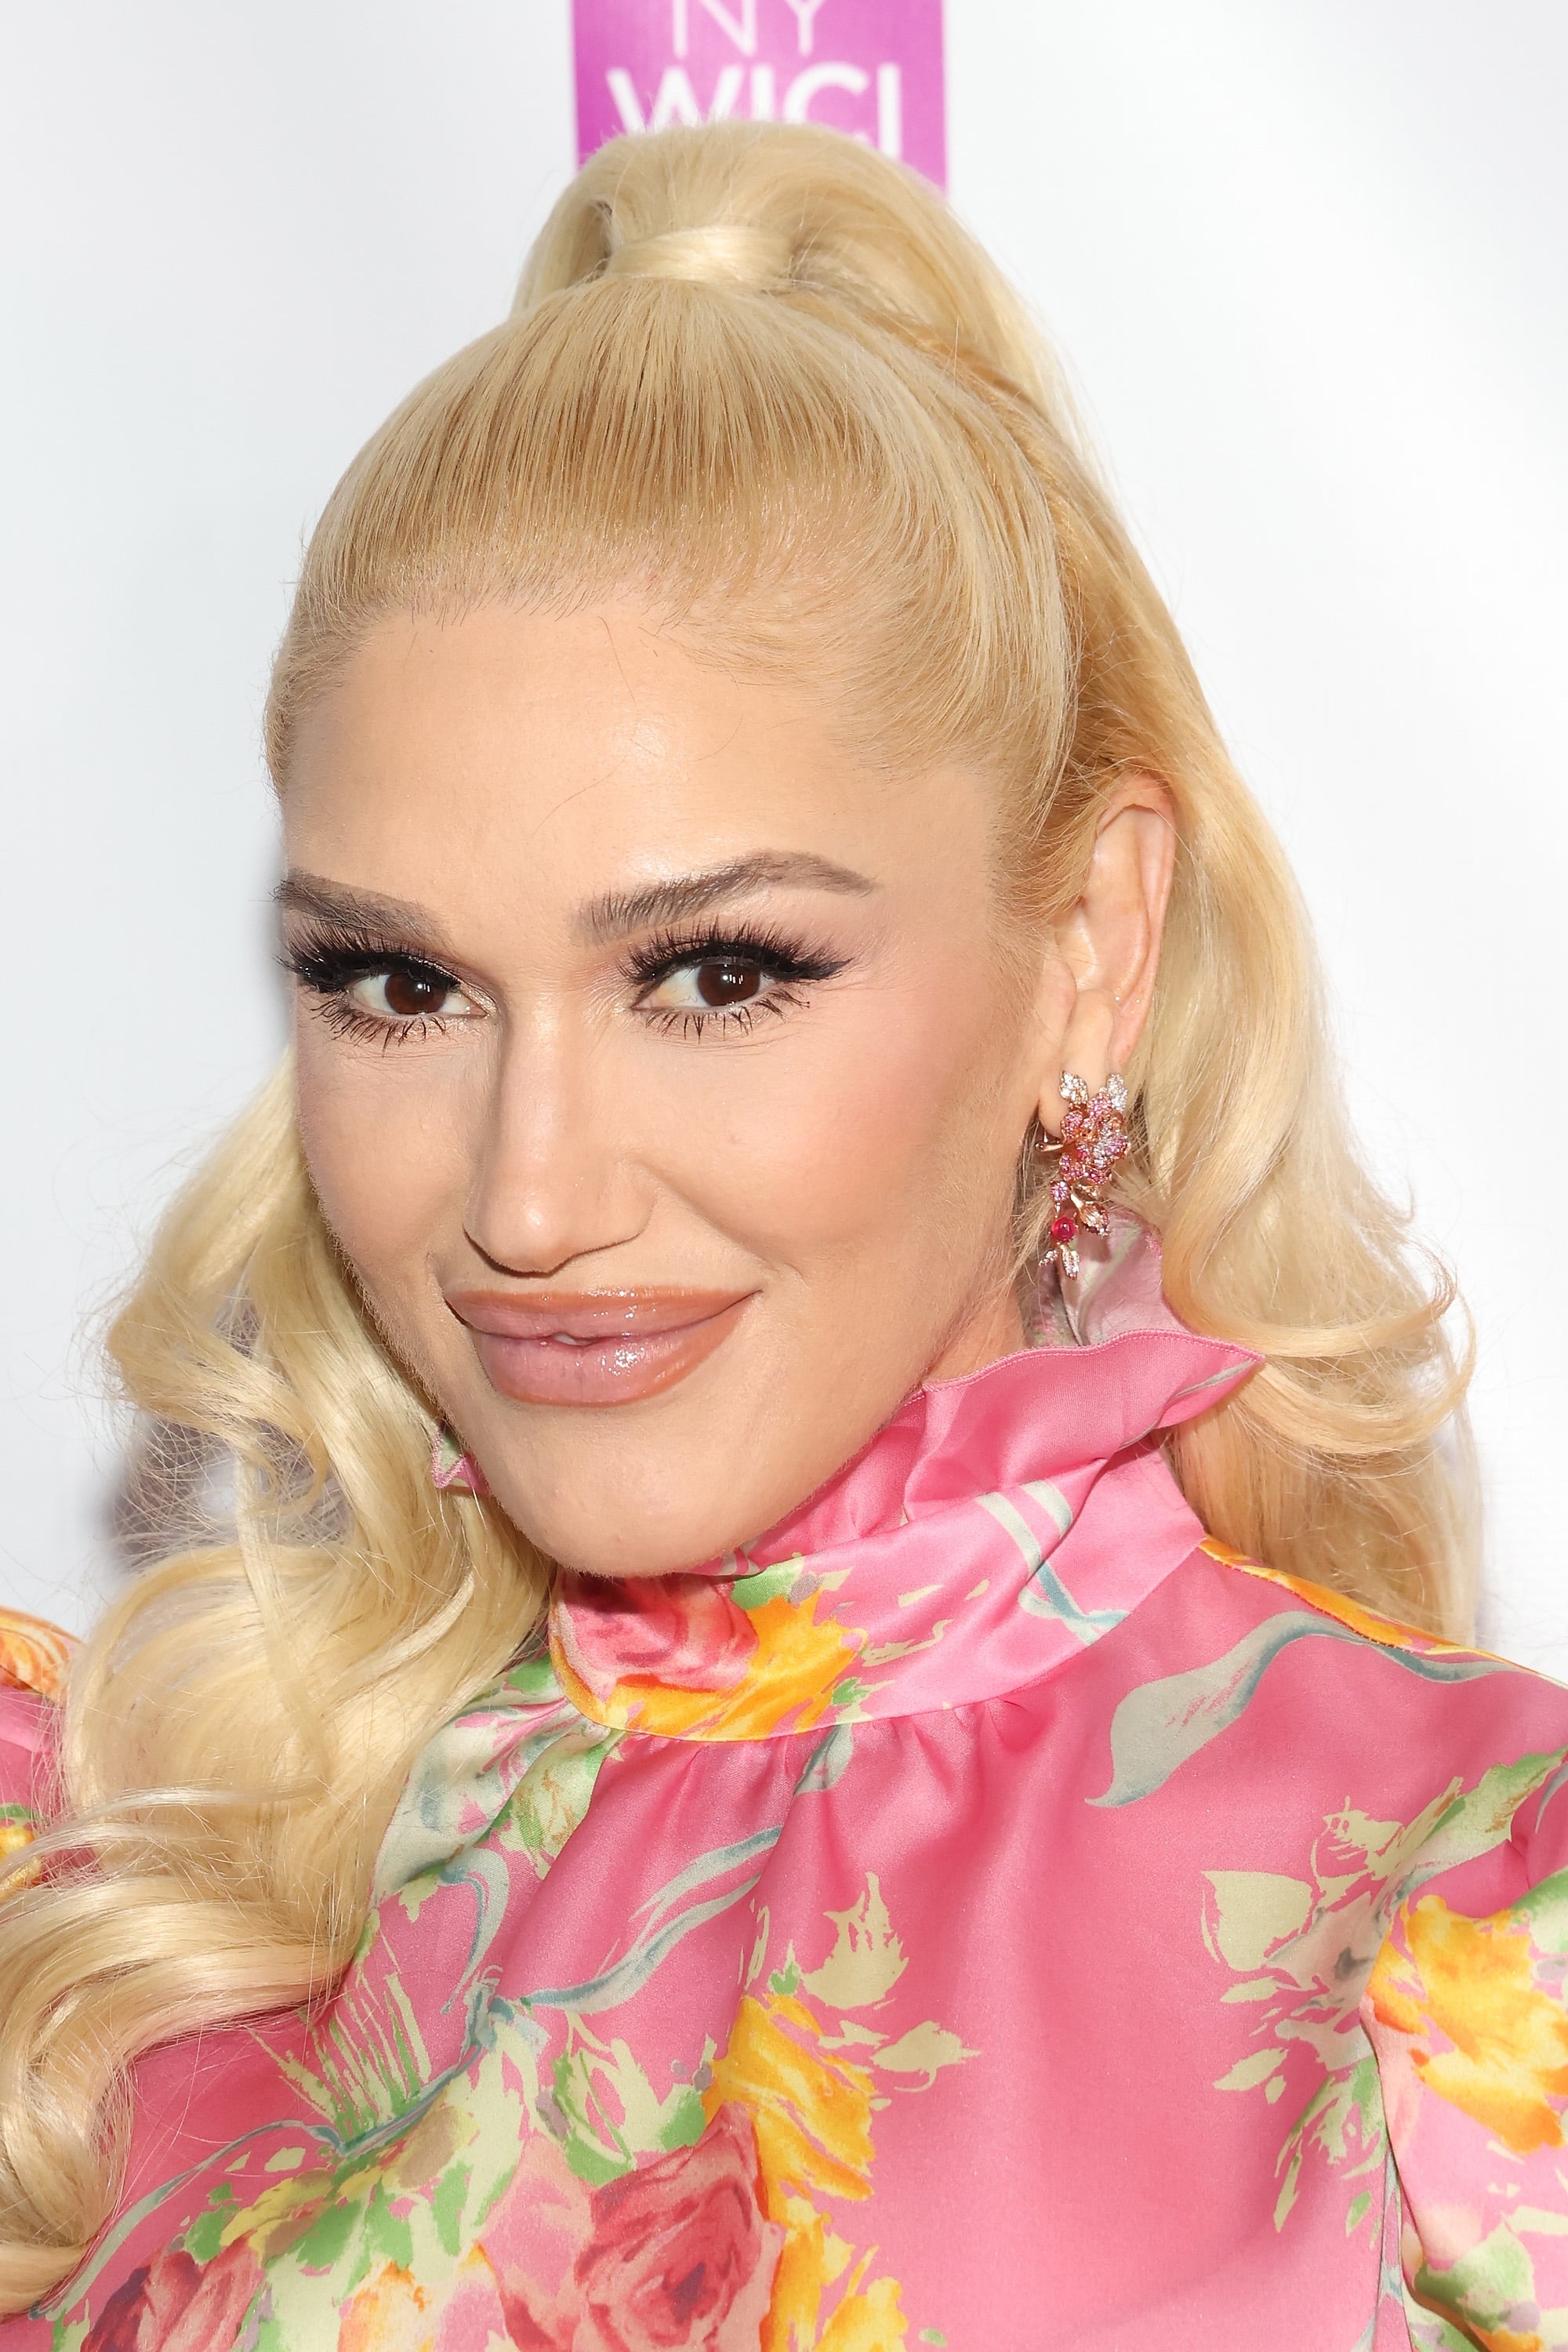 NEW YORK, NEW YORK - OCTOBER 26: Gwen Stefani attends the 2022 Matrix Awards at The Ziegfeld Ballroom on October 26, 2022 in New York City. (Photo by Taylor Hill/WireImage)